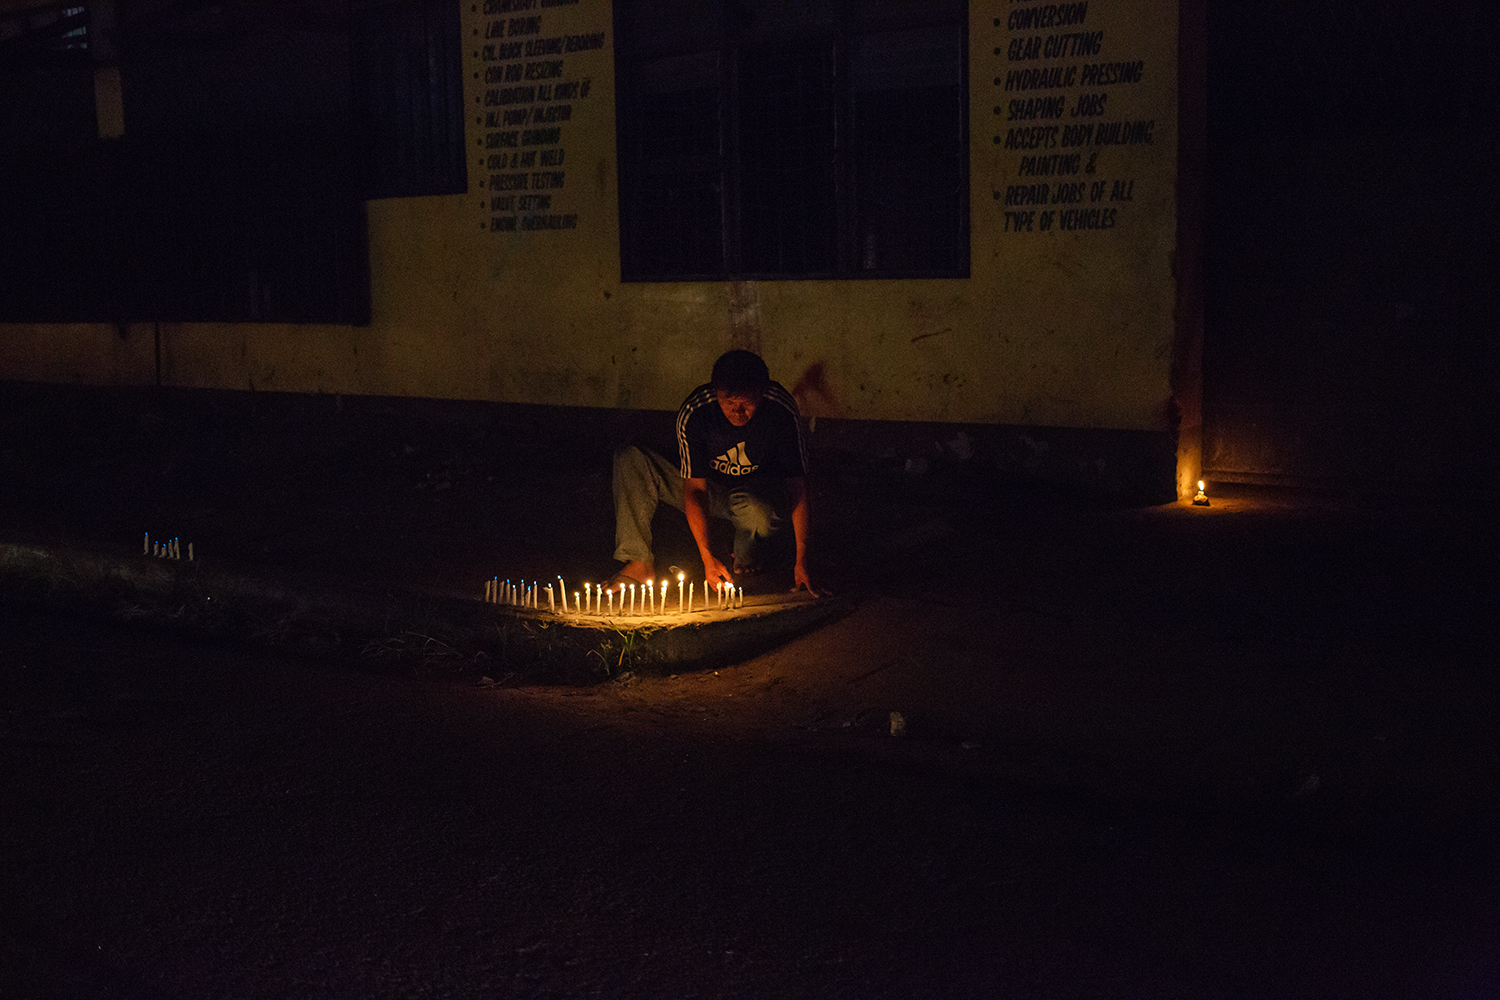  A man lights candles for loved ones lost on the one year anniversary of the landfall of Typhoon Haiyan in Tacloban, Leyte, the Philippines.&nbsp; 